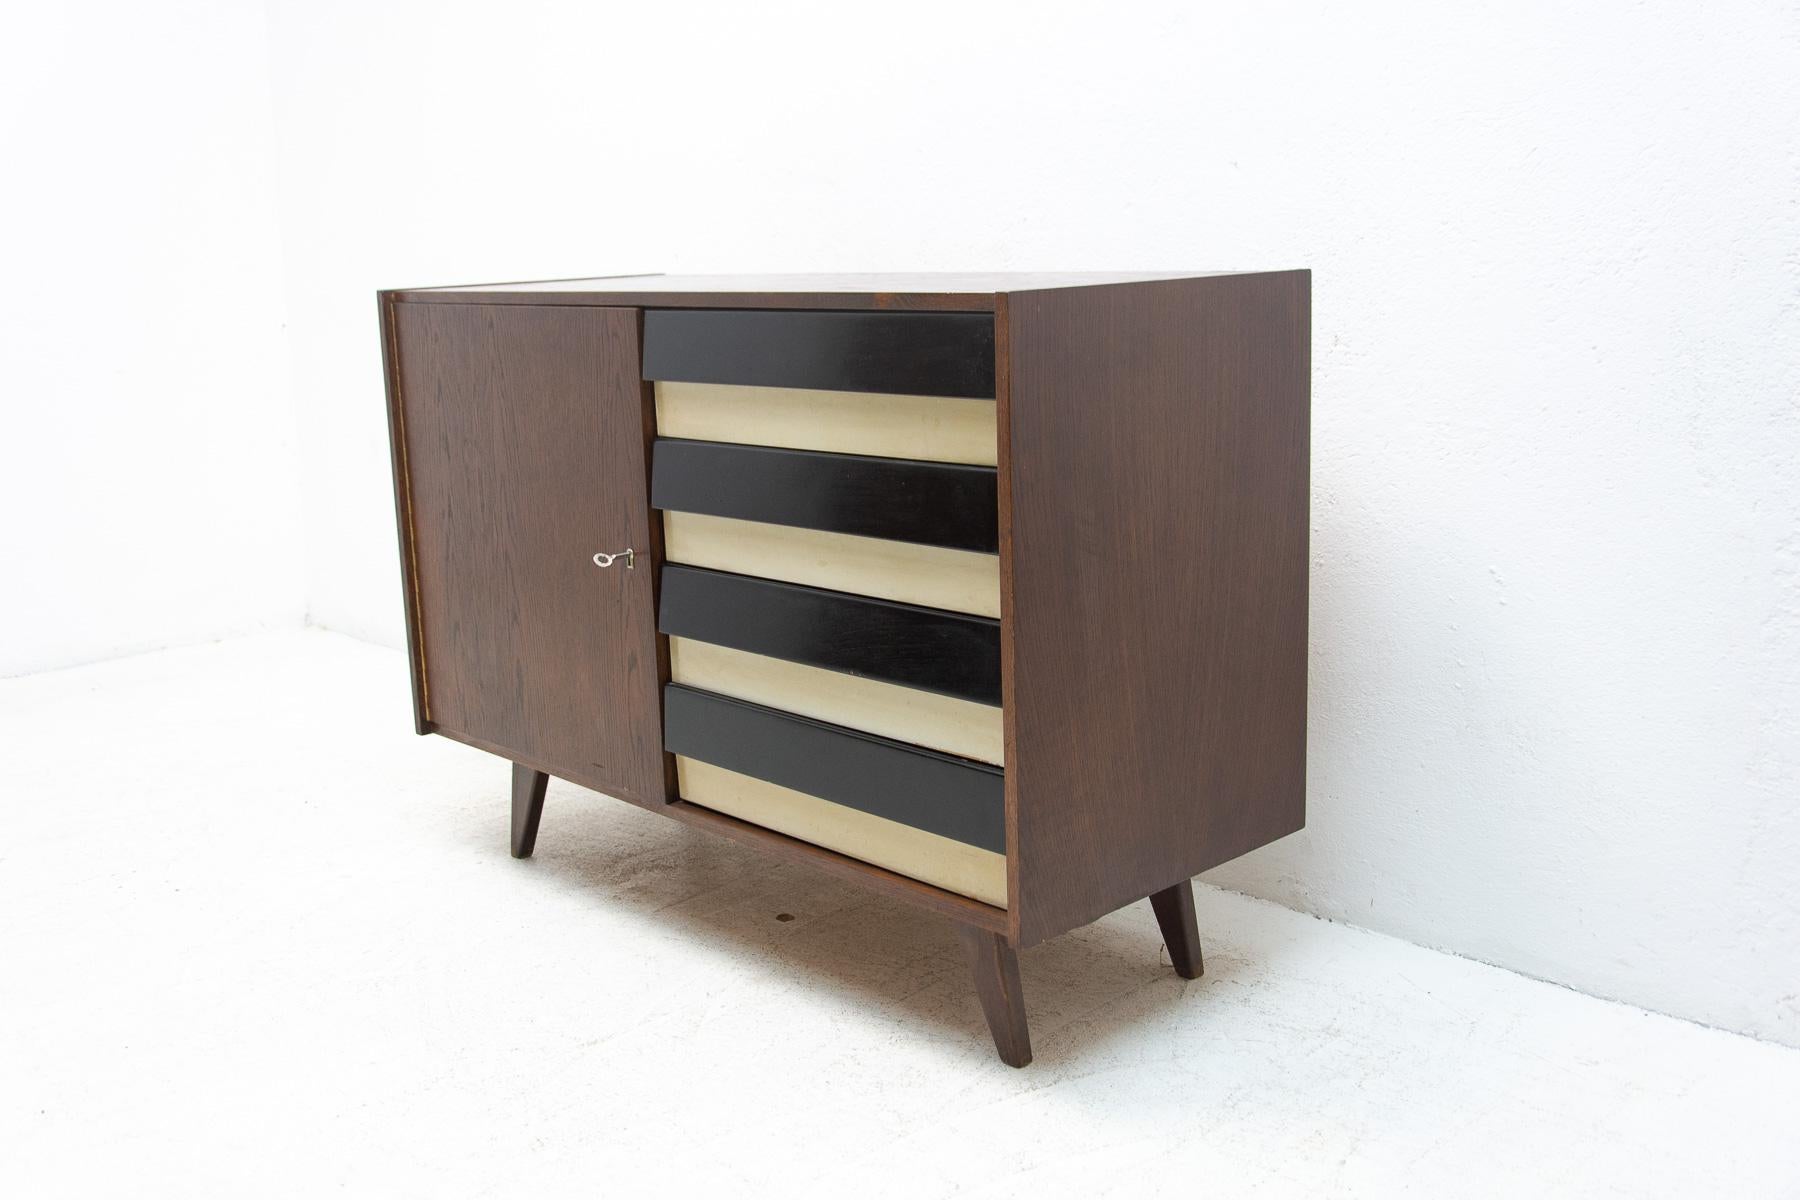 Mid-century chest of drawers, model no. U-458, designed by Jiri Jiroutek. It was made in the 1960´s and produced by “Interier Praha”. This model associated with world-renowned EXPO 58-“Brussels period”. It´s made of beech wood and plywood. The chest